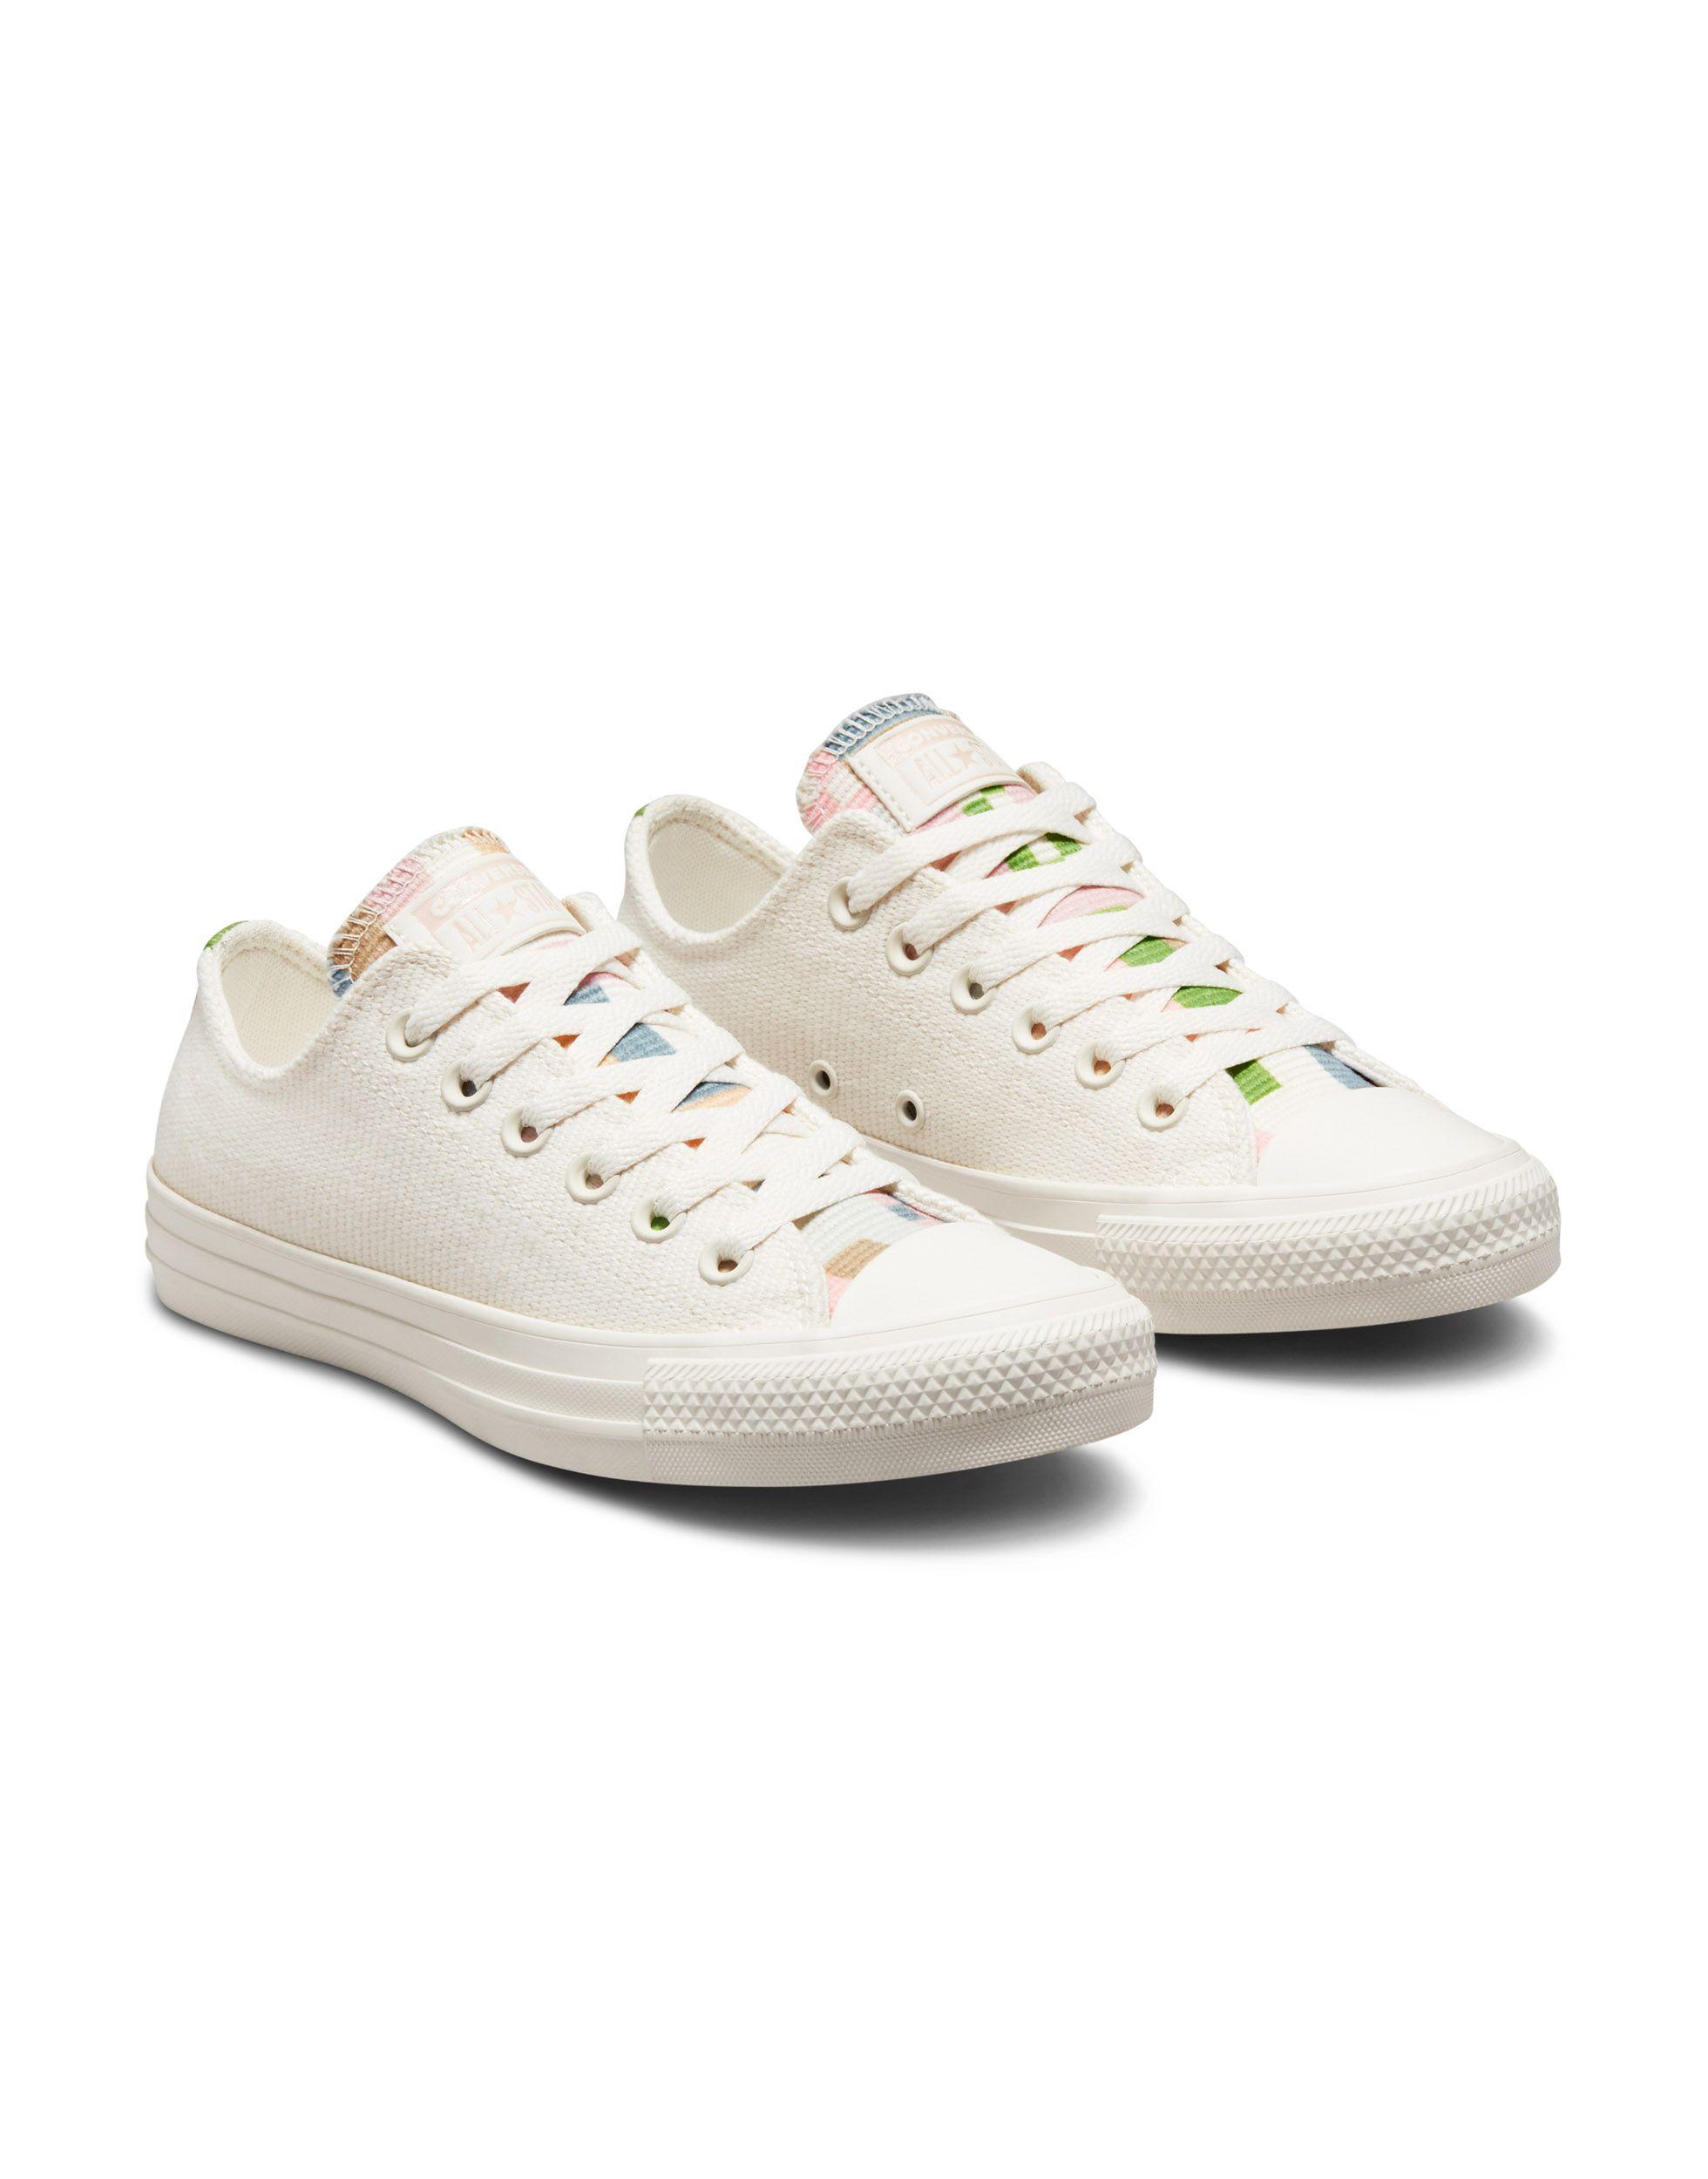 Converse Chuck Taylor All Star Ox Folk Canvas Sneakers in White | Lyst